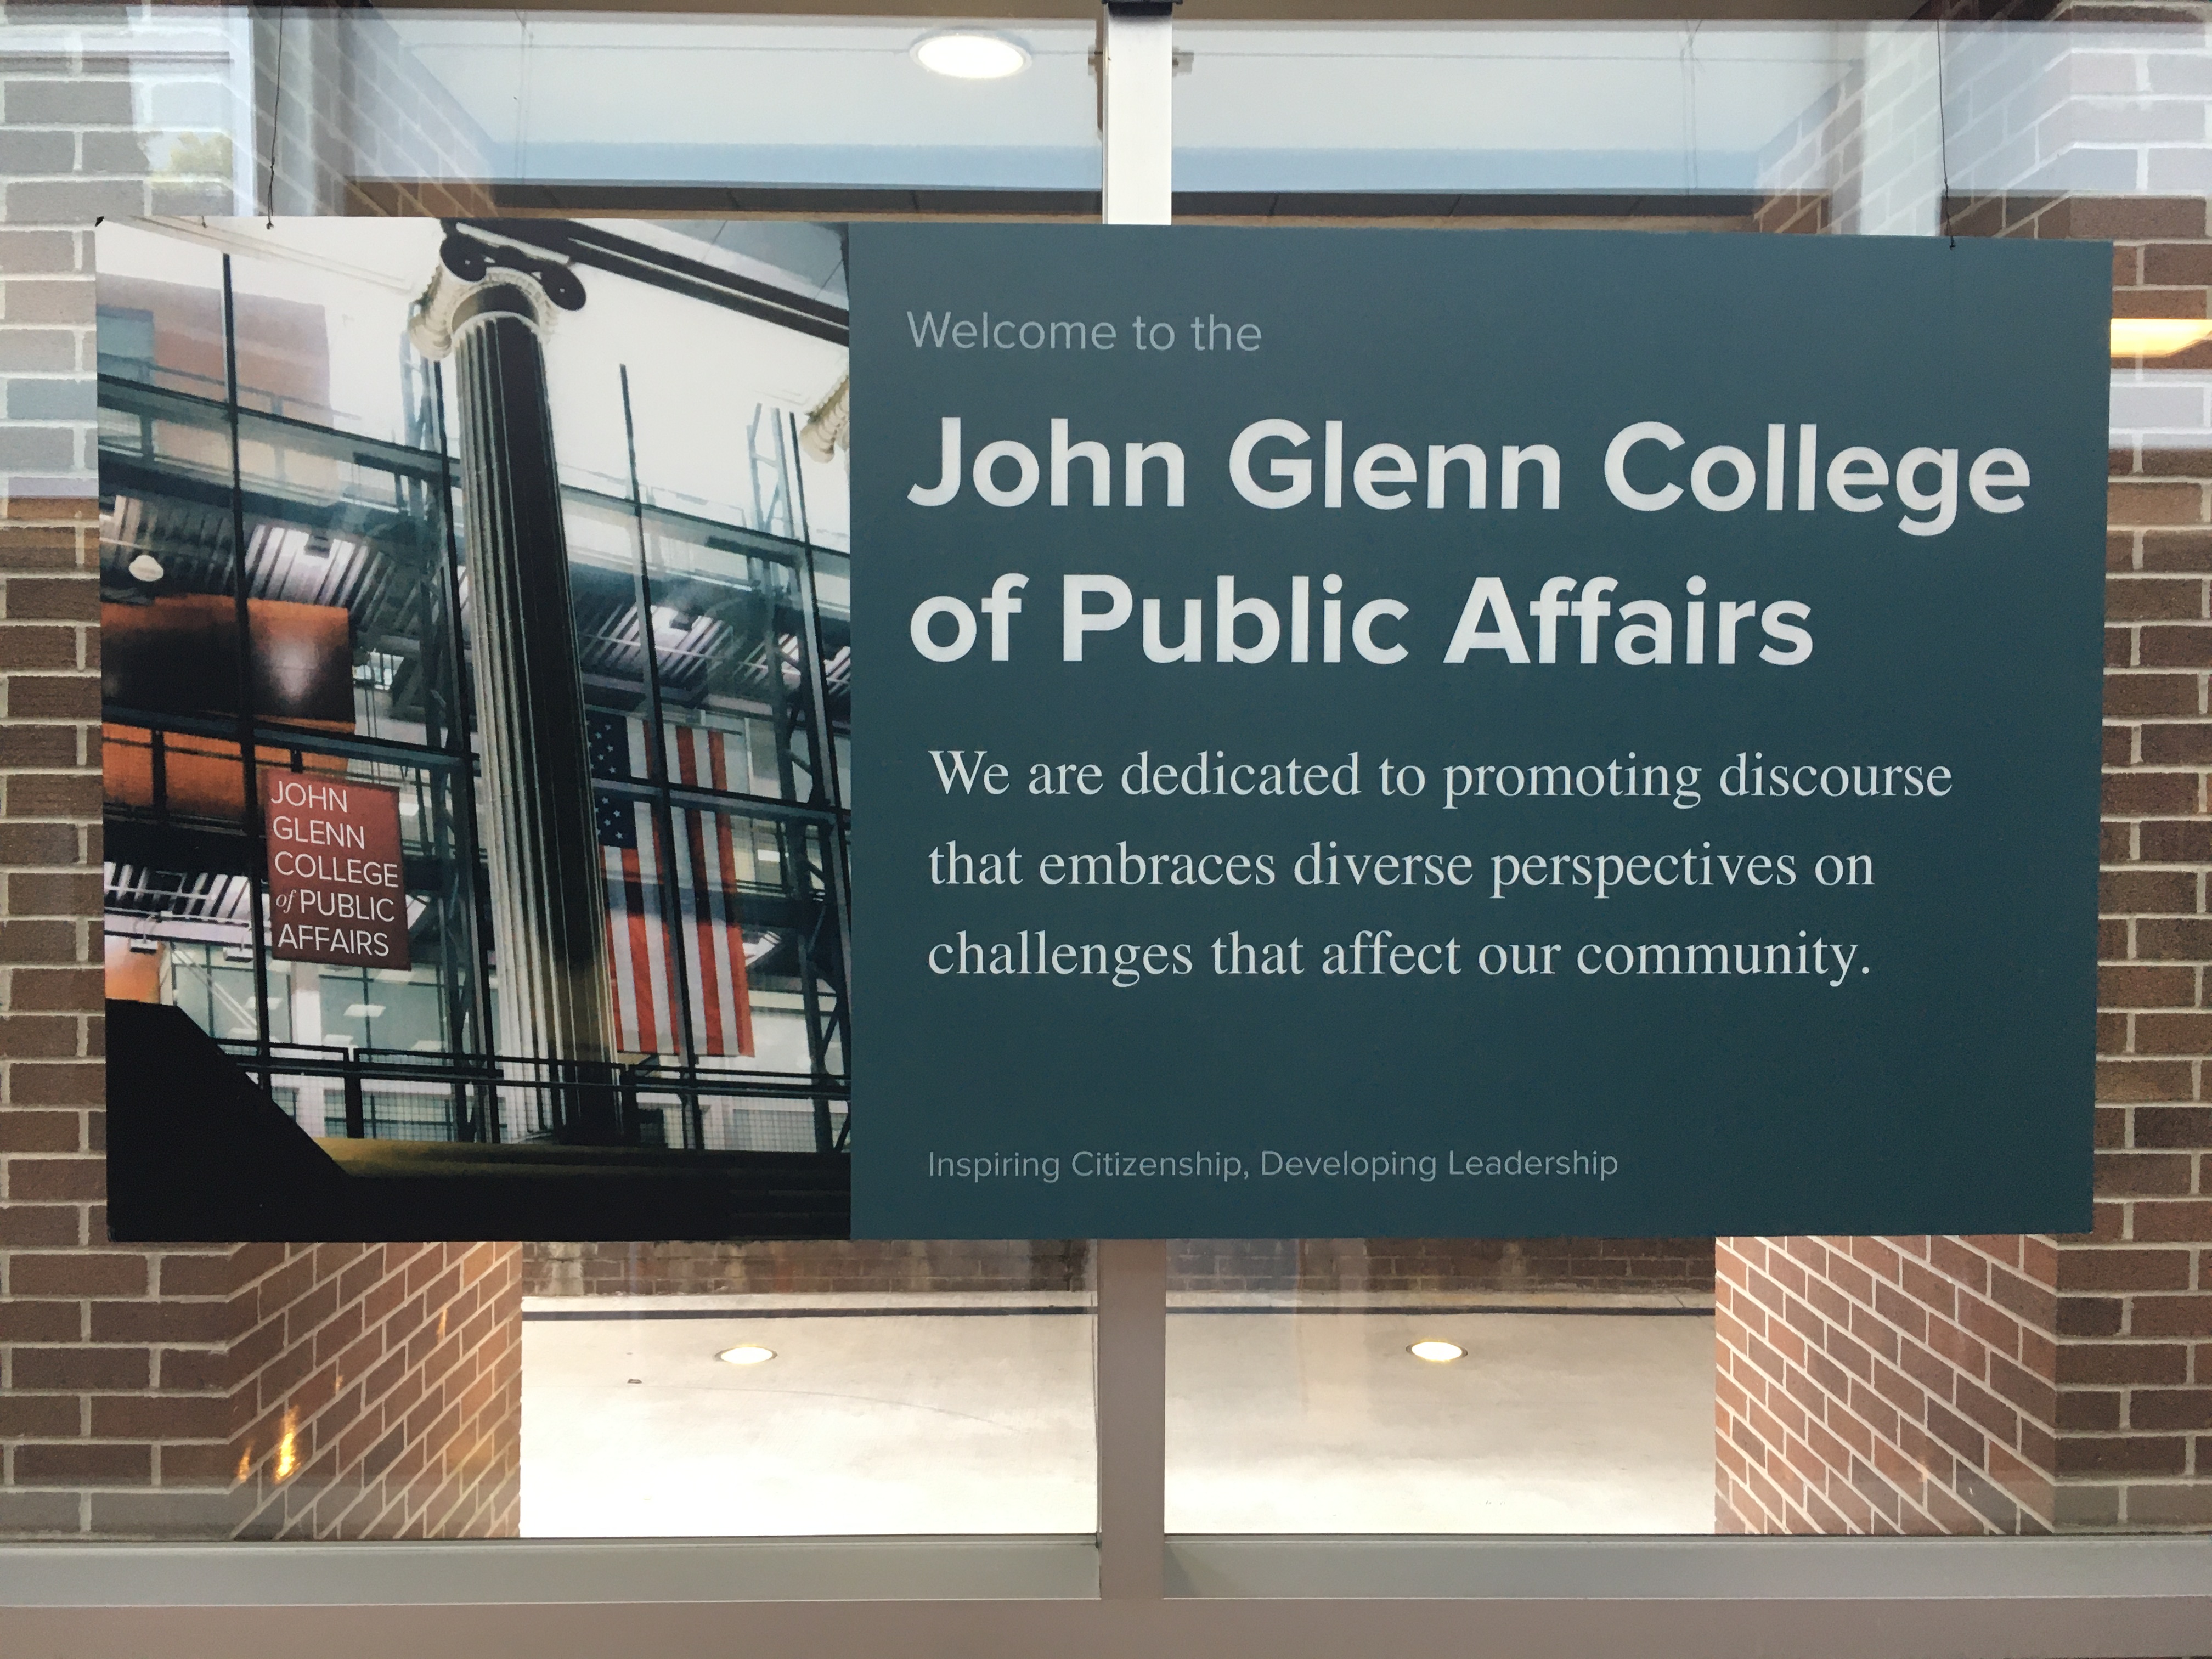 Glenn College welcome sign with the text "We are dedicated to promoting discourse that embraces diverse perspectives on challenges that affect our community."